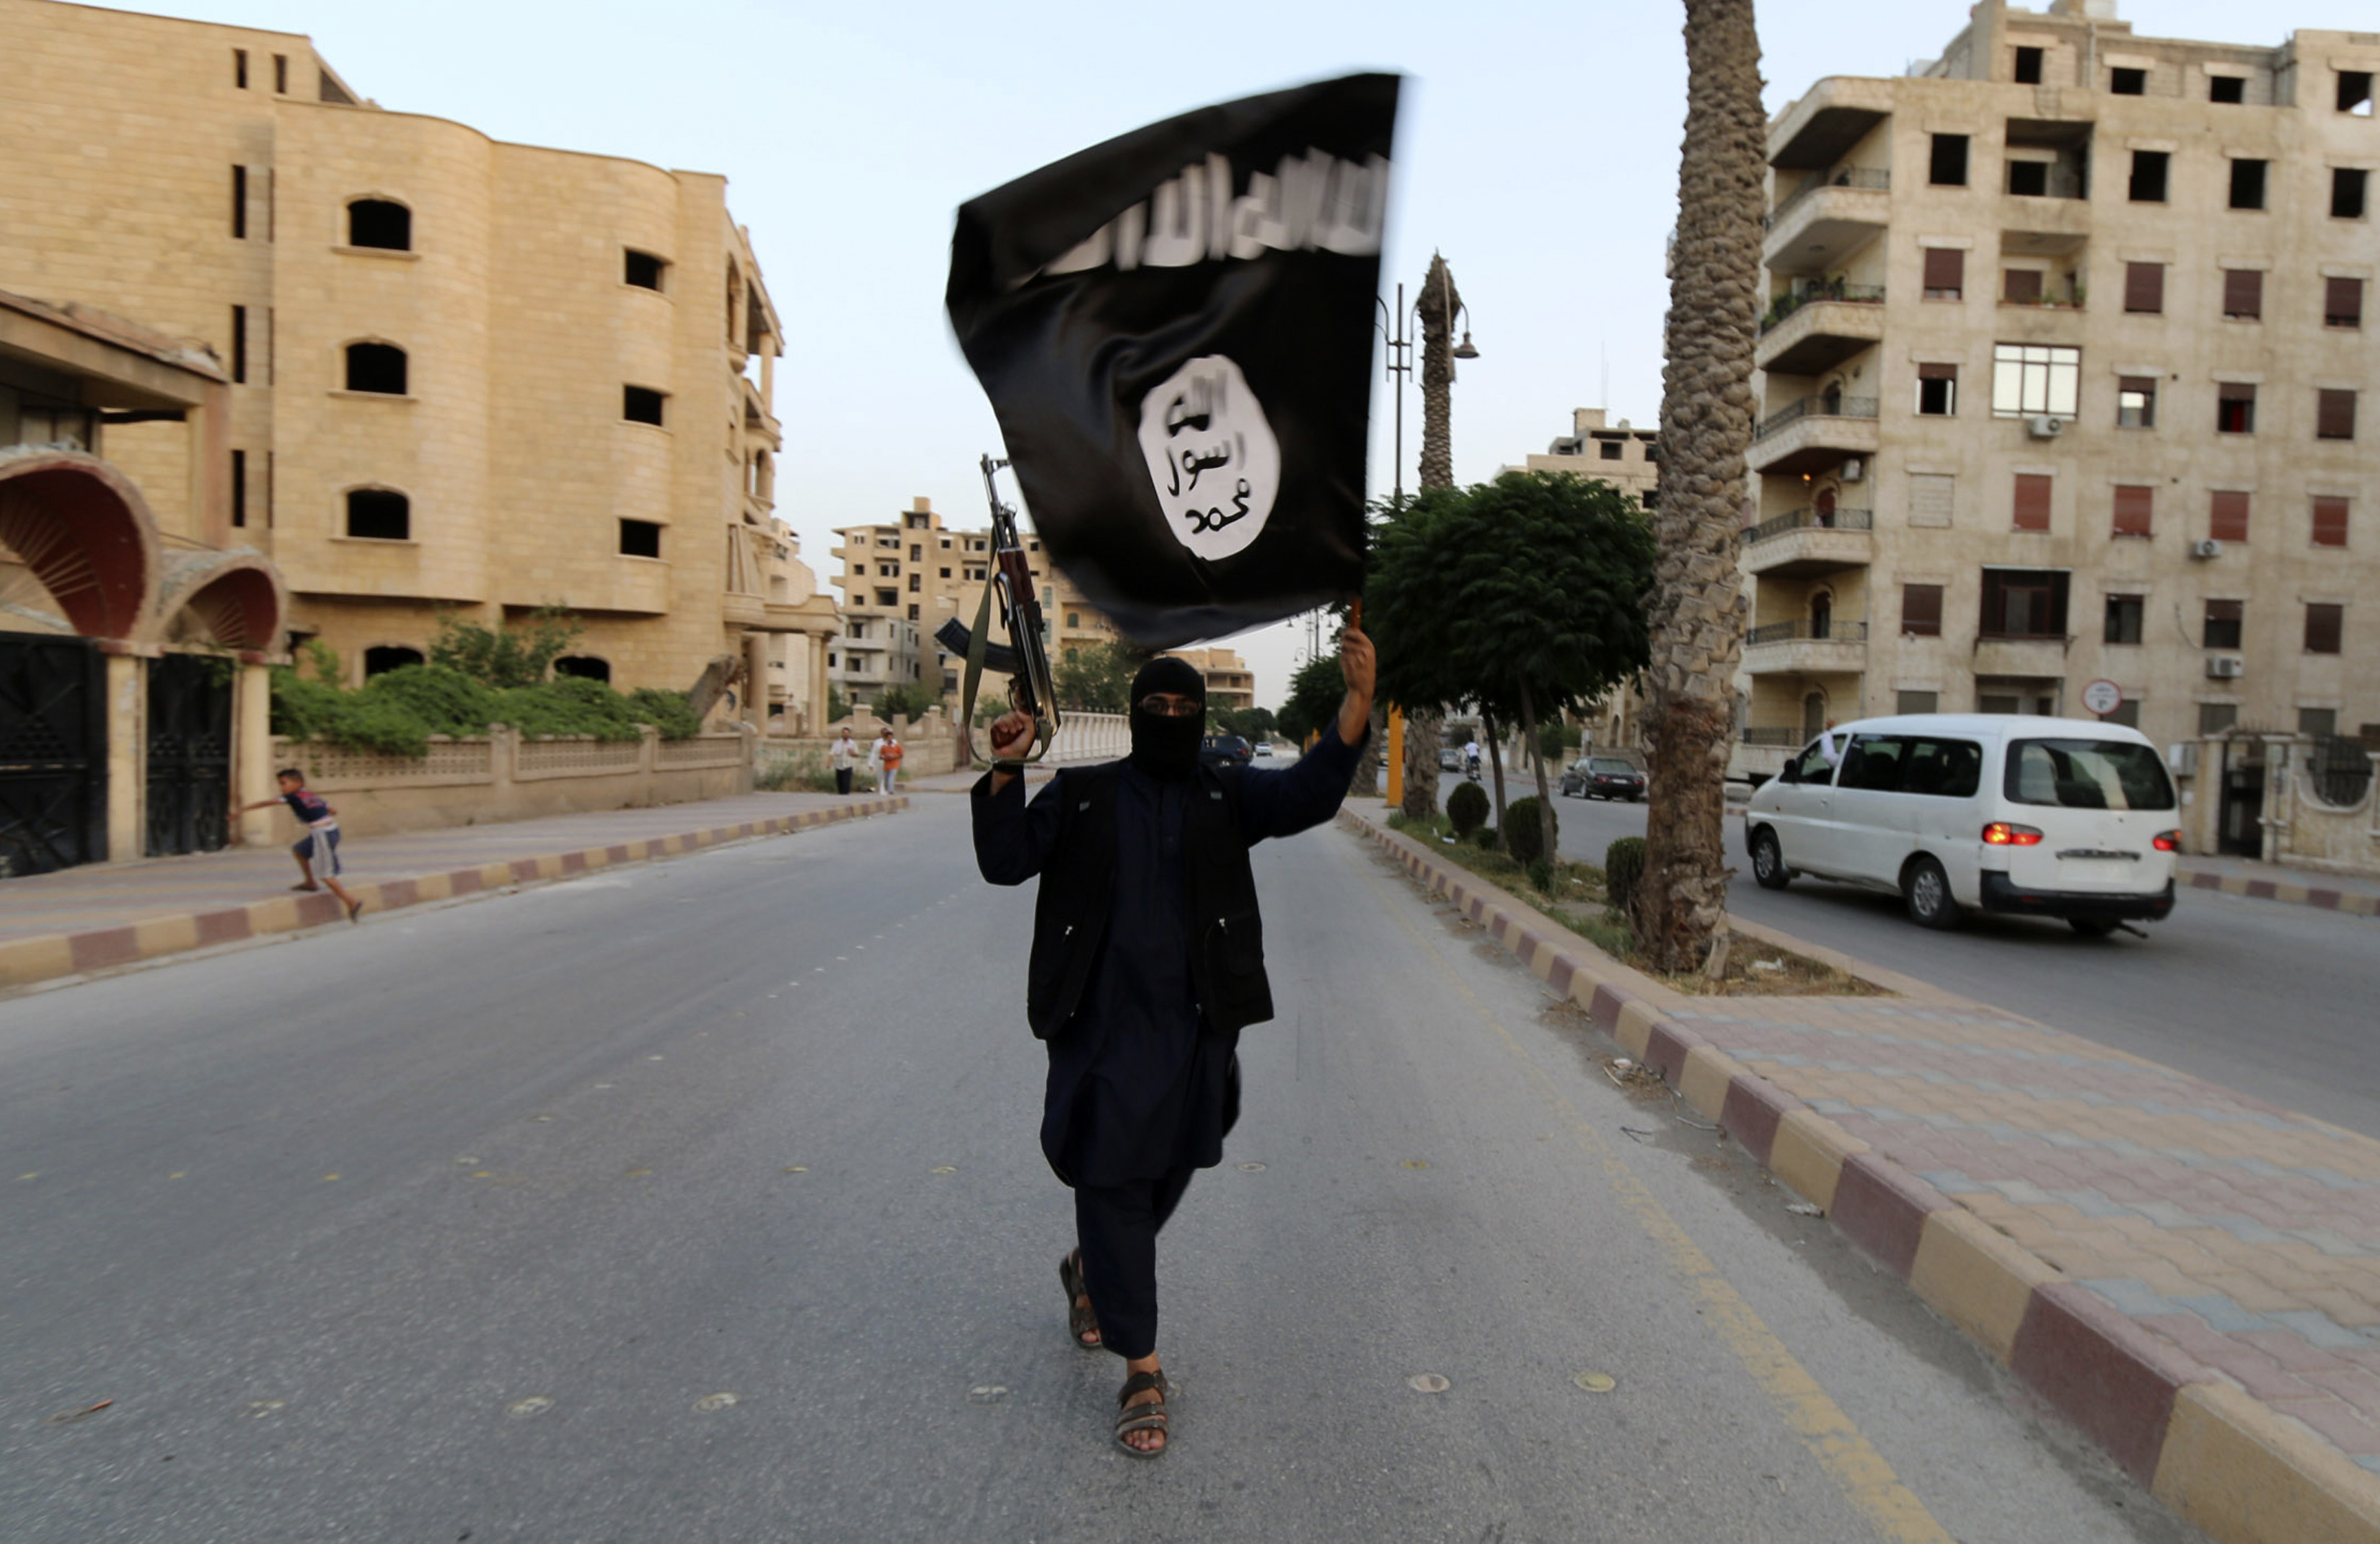 A member loyal to the Islamic State in Iraq and the Levant (ISIL) waves an ISIL flag in Raqqa June 29, 2014. The offshoot of al Qaeda which has captured swathes of territory in Iraq and Syria has declared itself an Islamic "Caliphate" and called on factions worldwide to pledge their allegiance, a statement posted on jihadist websites said on Sunday. The group, previously known as the Islamic State in Iraq and the Levant (ISIL), also known as ISIS, has renamed itself "Islamic State" and proclaimed its leader Abu Bakr al-Baghadi as "Caliph" - the head of the state, the statement said. REUTERS/Stringer (SYRIA - Tags: POLITICS CIVIL UNREST TPX IMAGES OF THE DAY)  FOR BEST QUALITY IMAGE ALSO SEE: GF2EAAO0VU501 - RTR3WBPT